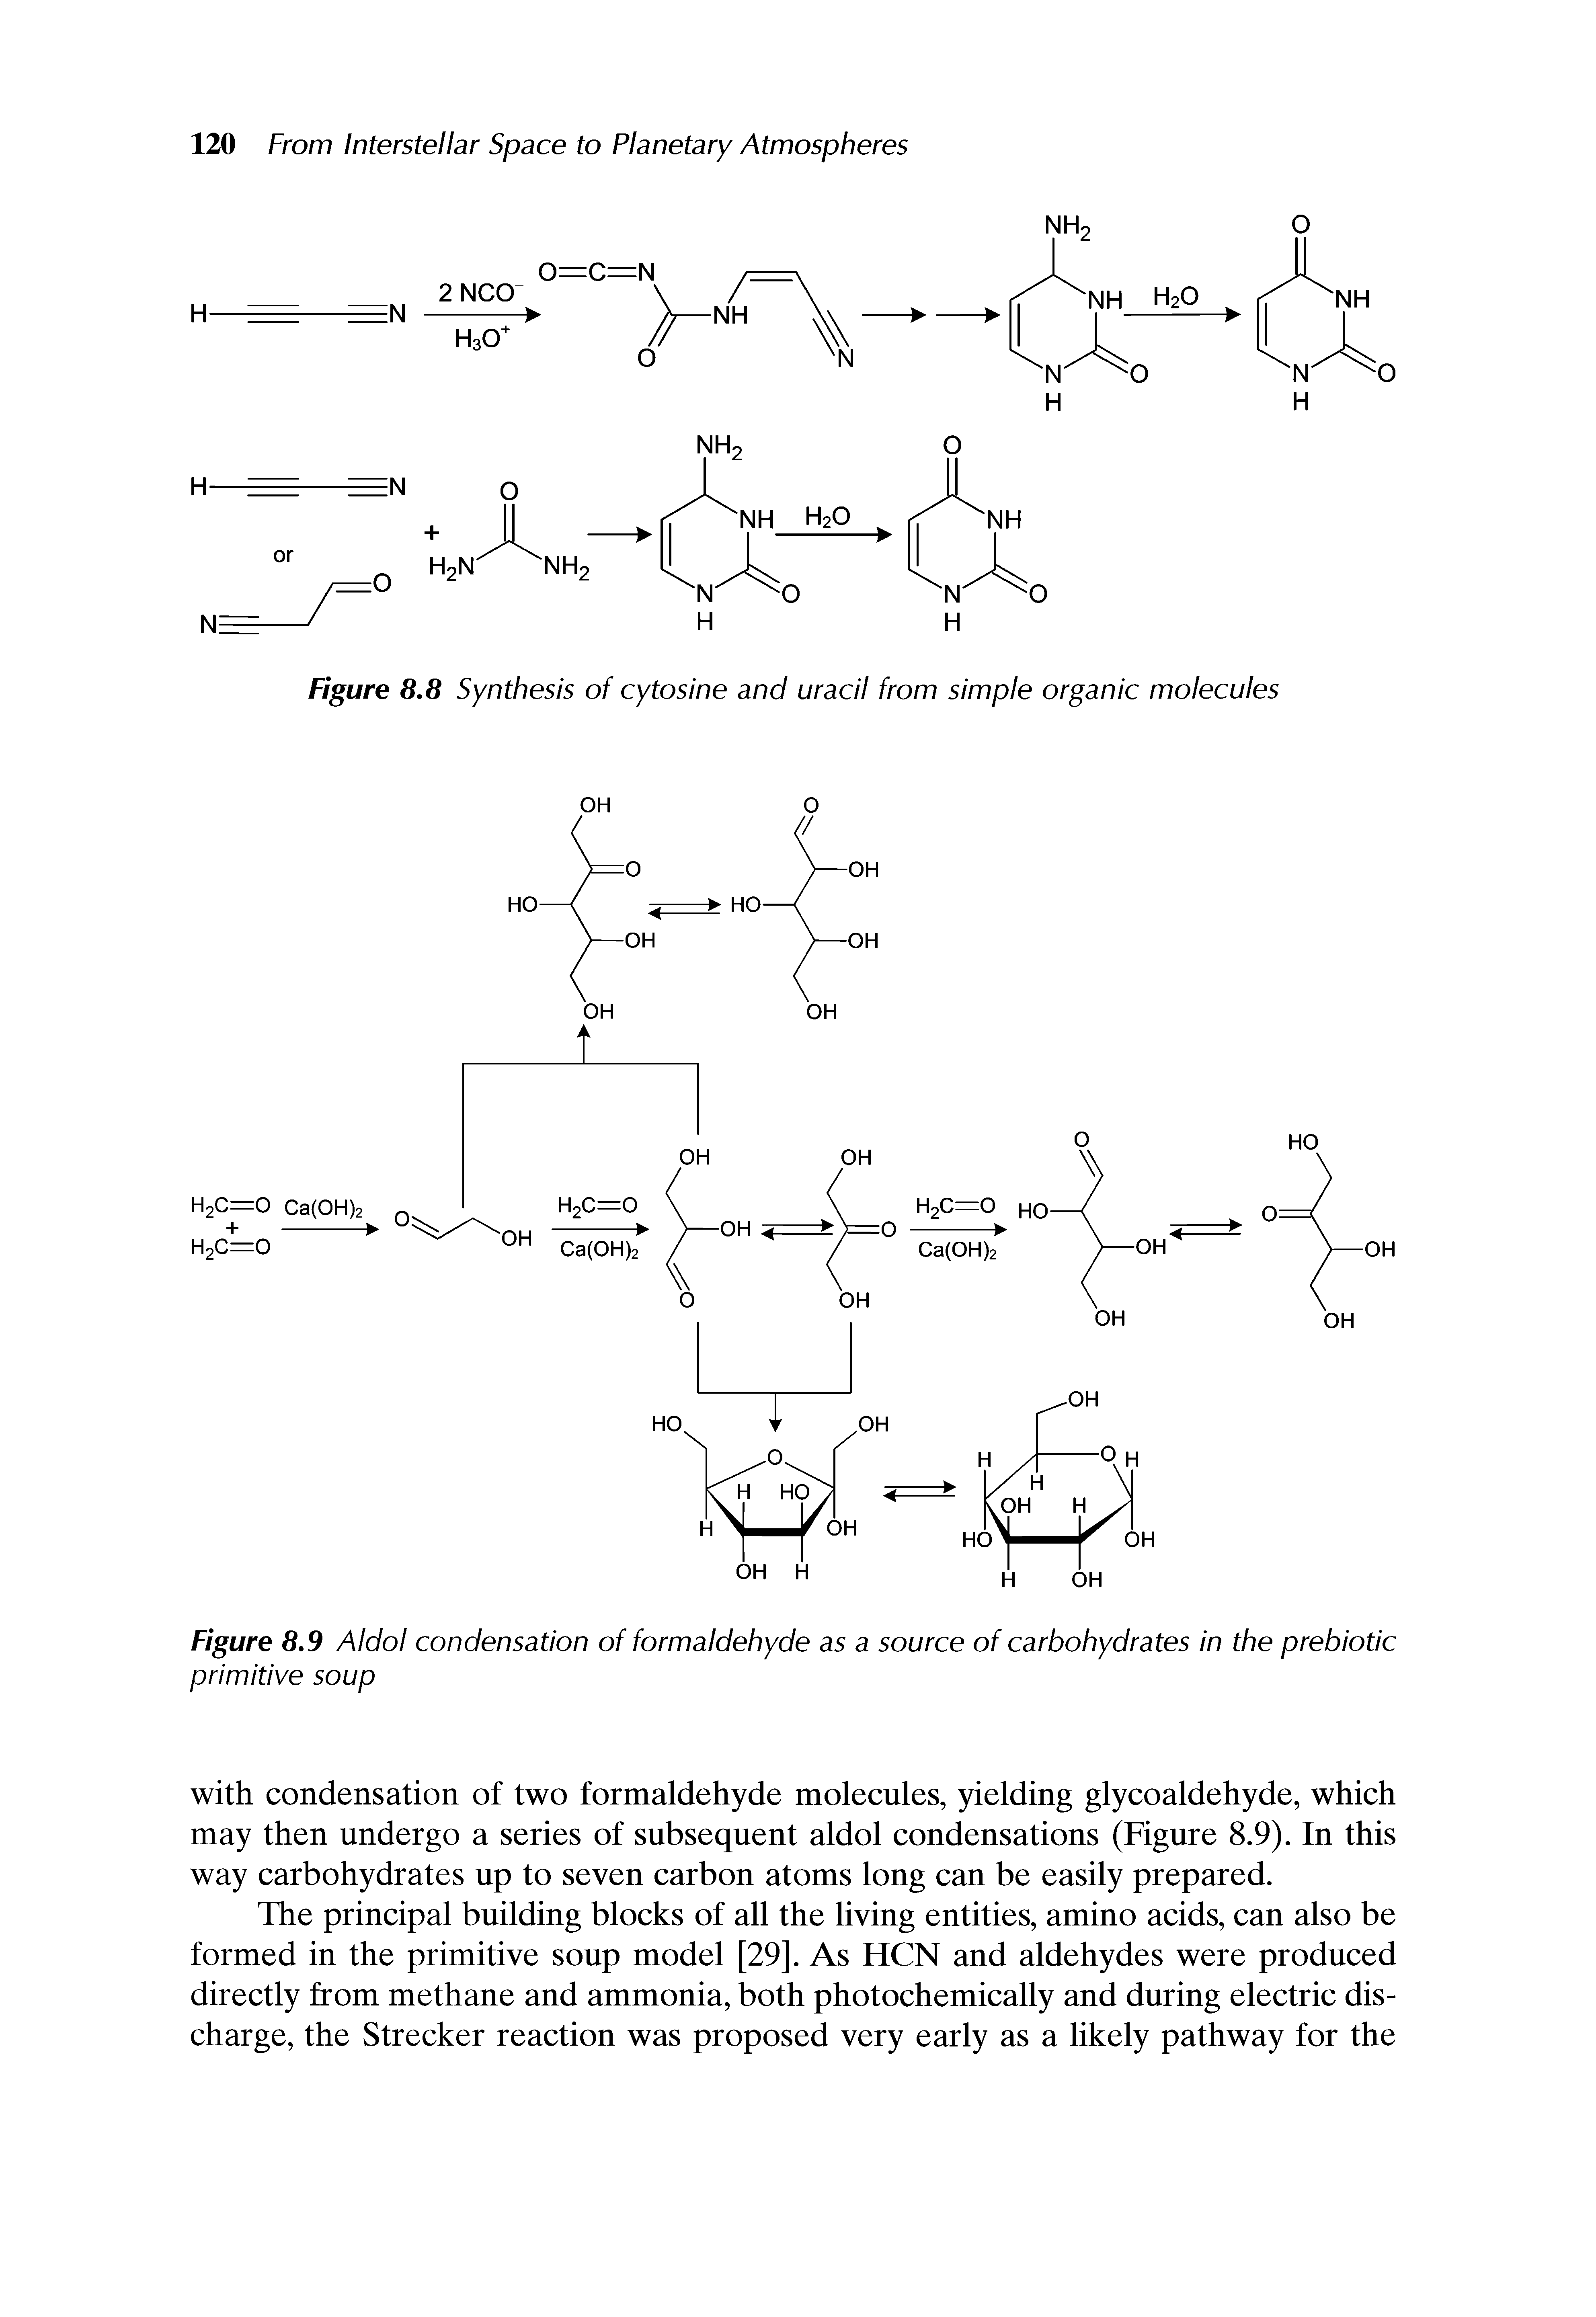 Figure 8.8 Synthesis of cytosine and uracil from simple organic molecules...